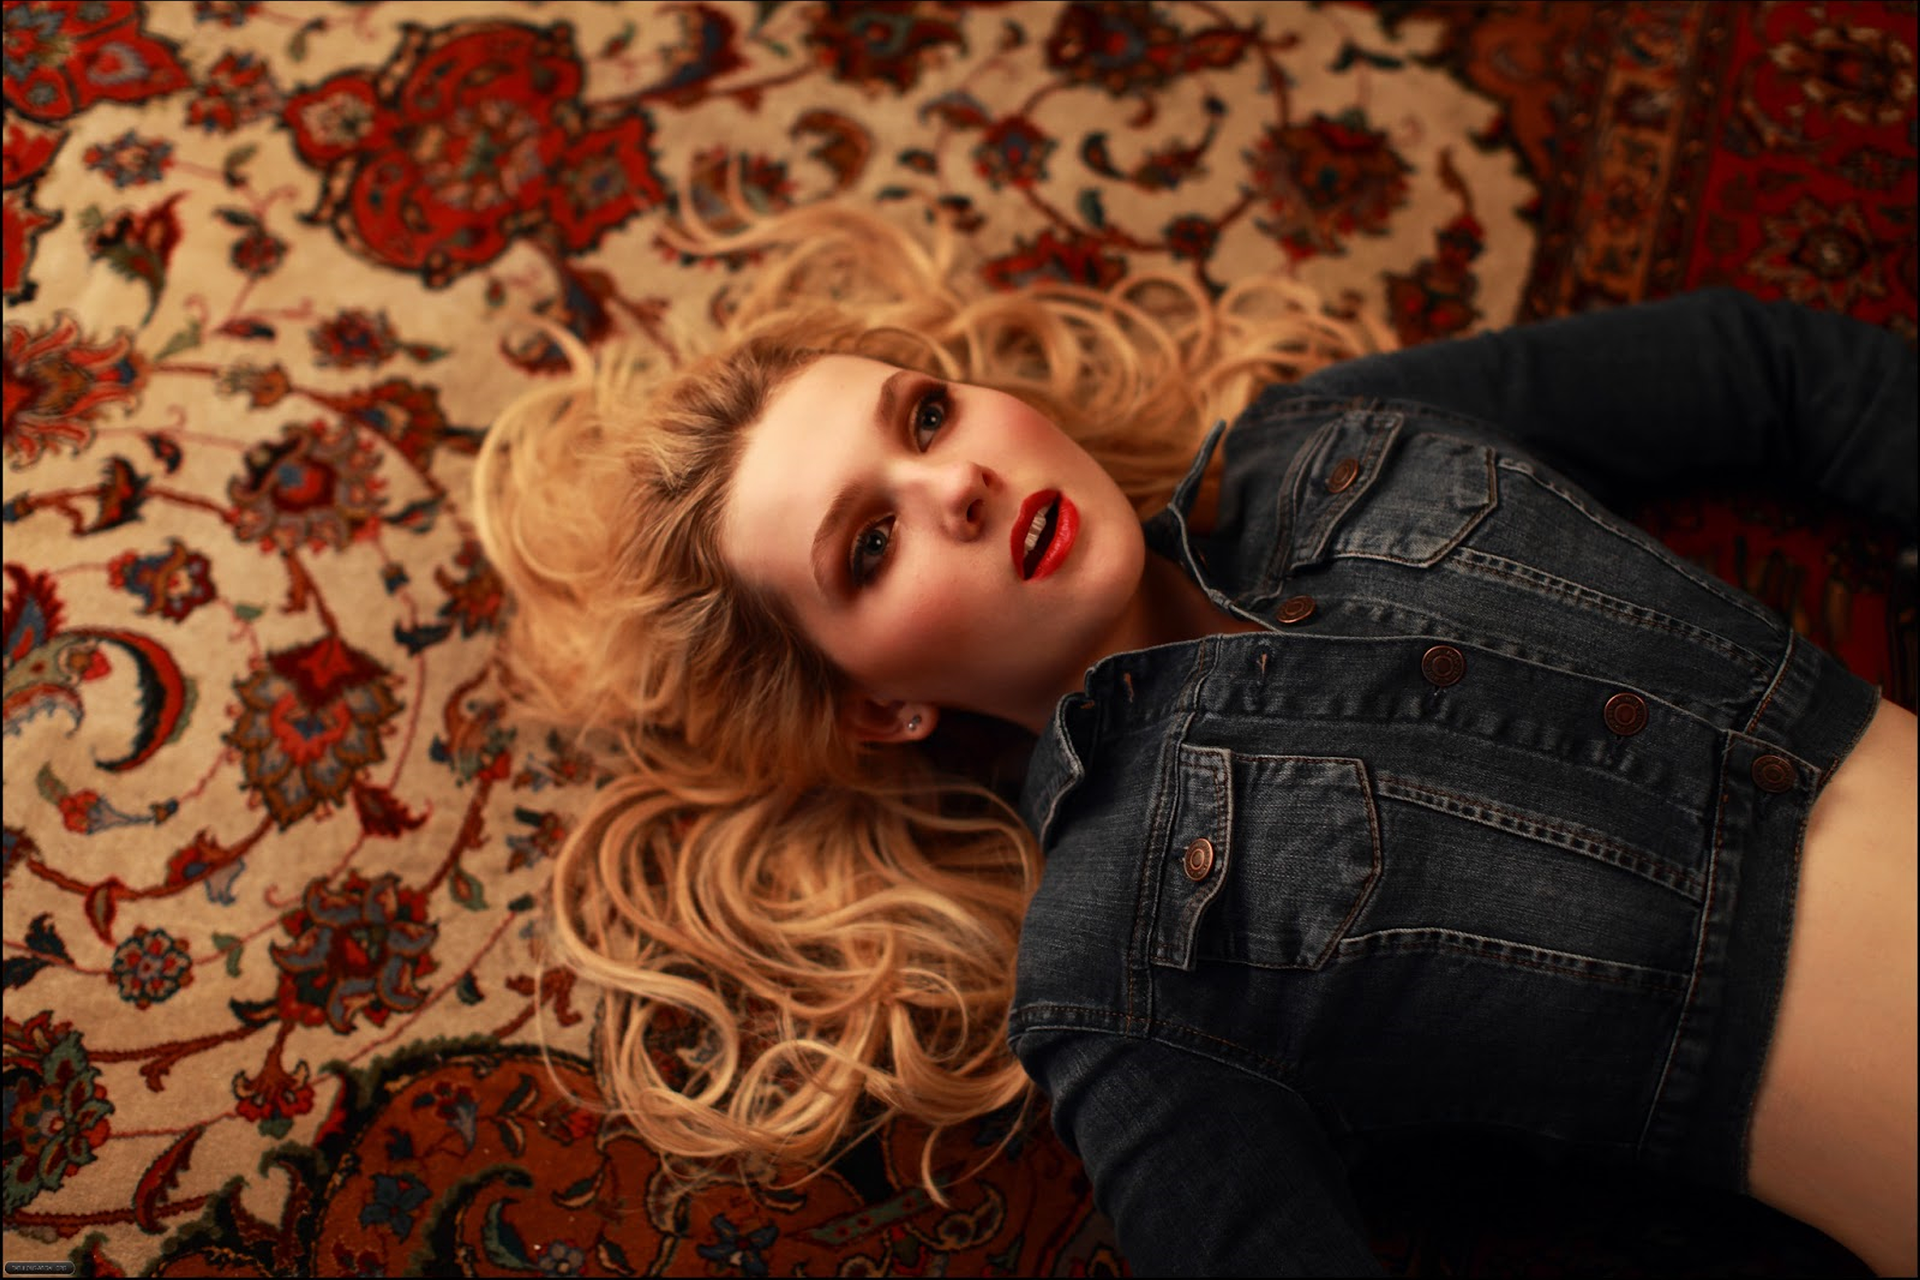 Abigail Breslin Actress Red Lipstick Blonde Women Jeans Jacket Open Mouth On The Floor 1920x1280